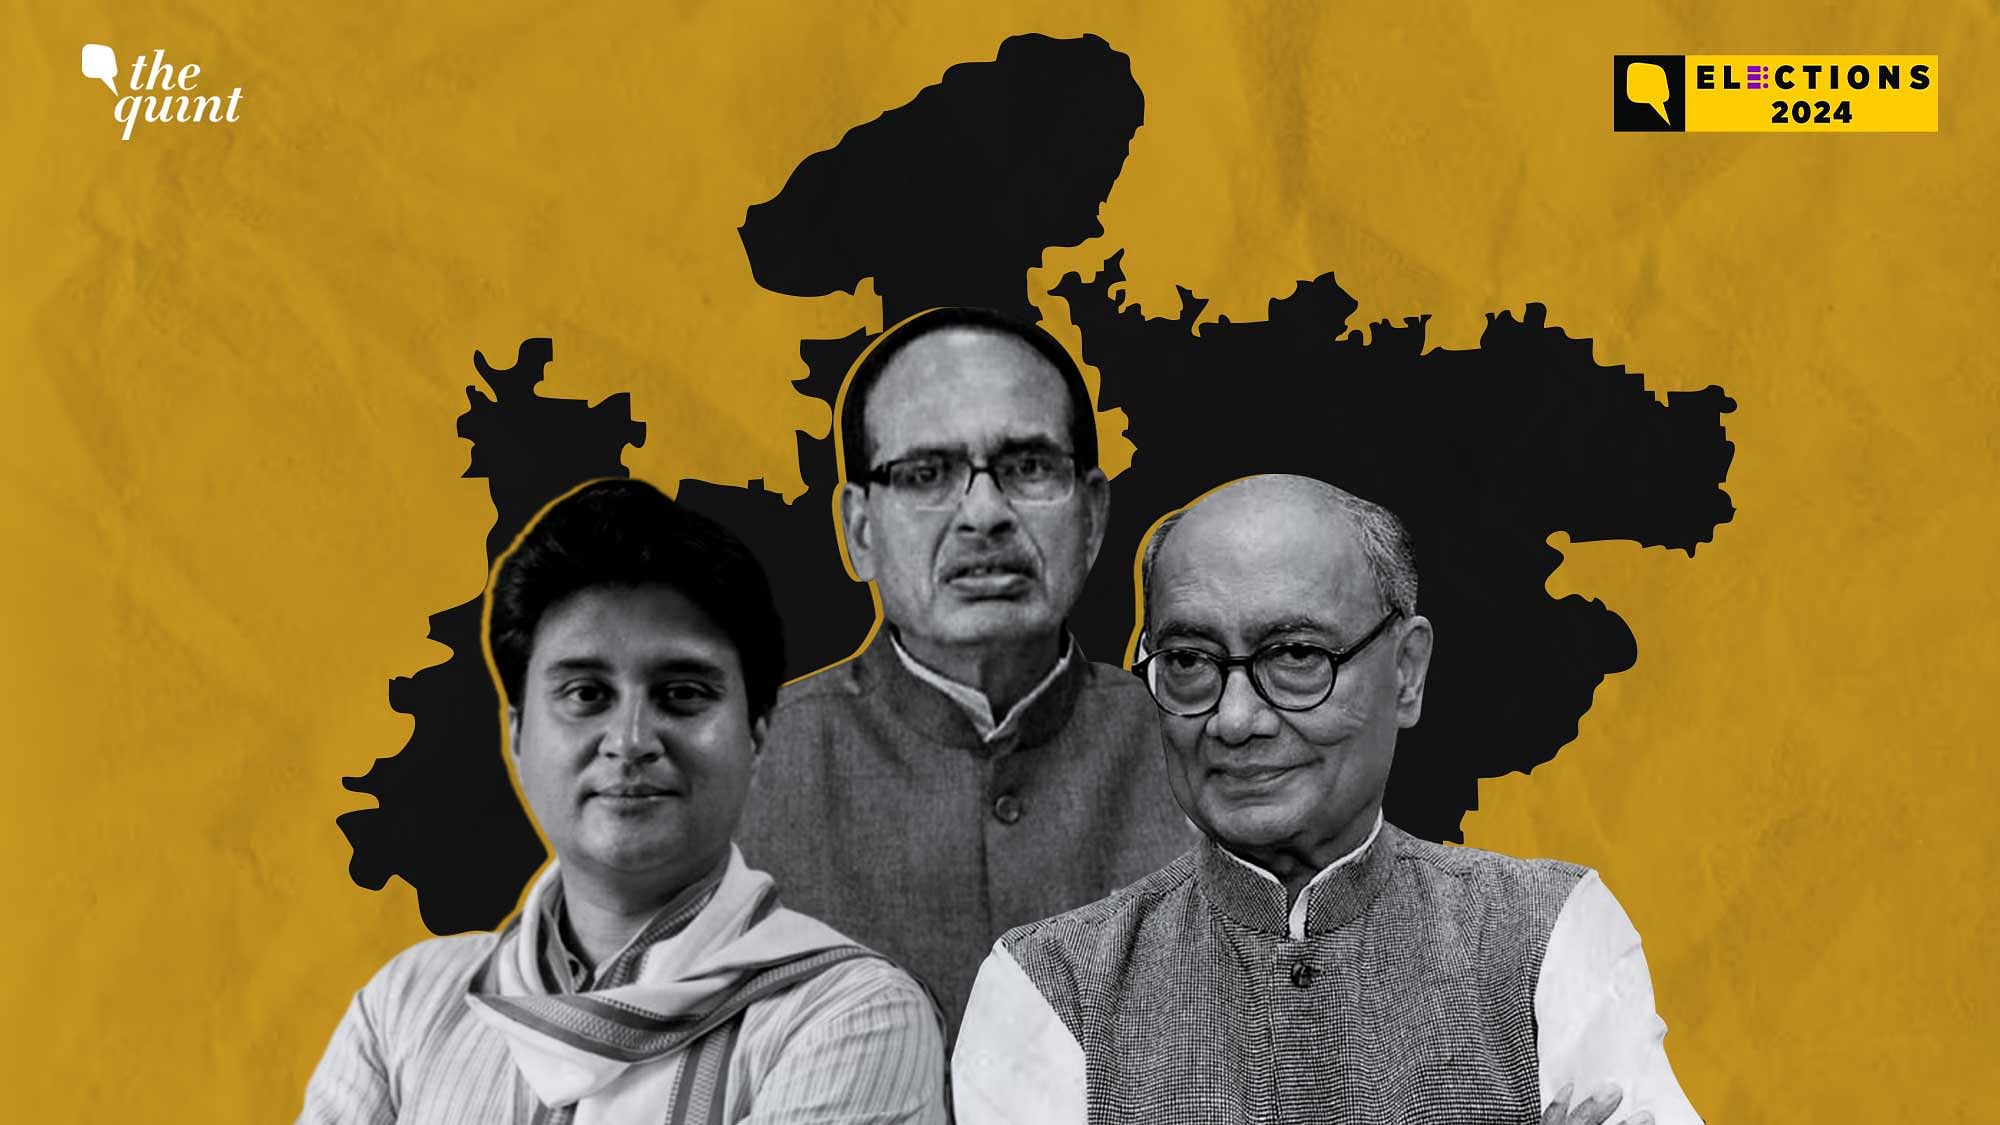 <div class="paragraphs"><p>Would Shivraj Singh Chouhan and Digvijaya Singh, who are returning to their respective home turfs after decades, regain the trust of their former voters? And will Scindia reclaim his lost glory in the face of Congress fielding a Yadav candidate?</p></div>